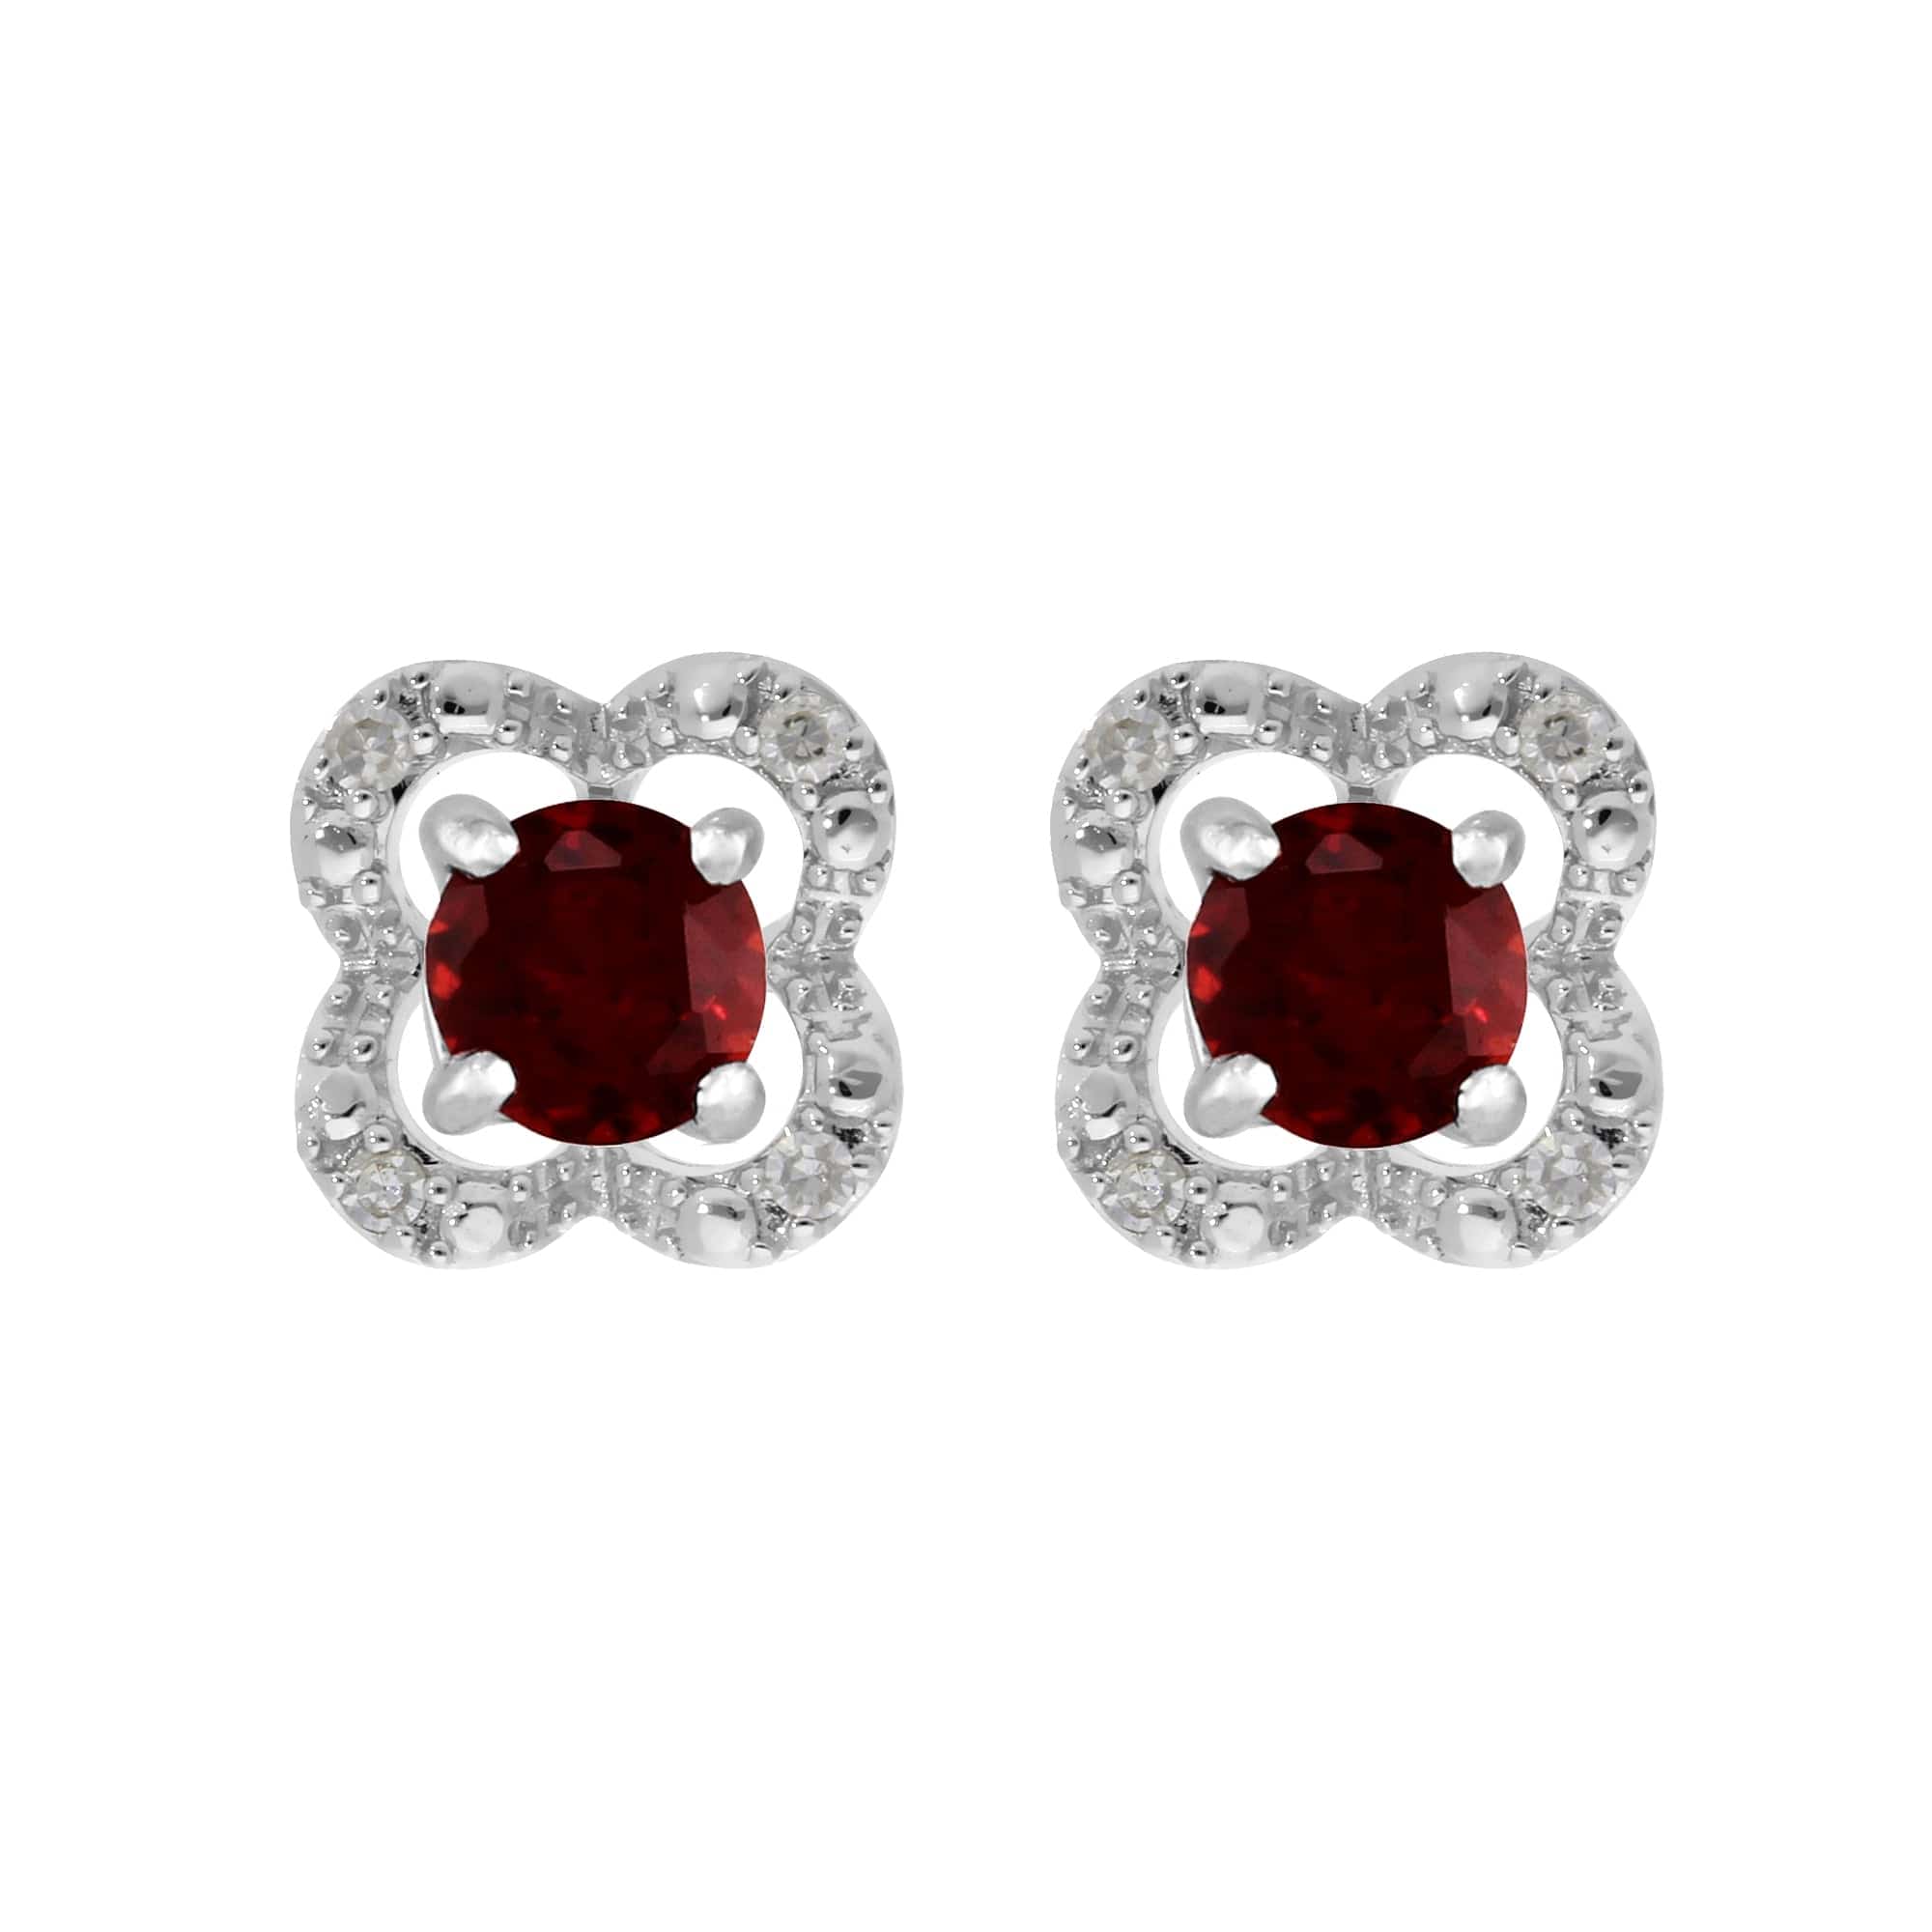 117E0031109-162E0244019 Classic Round Garnet Studs with Detachable Diamond Flower Ear Jacket in 9ct White Gold 1